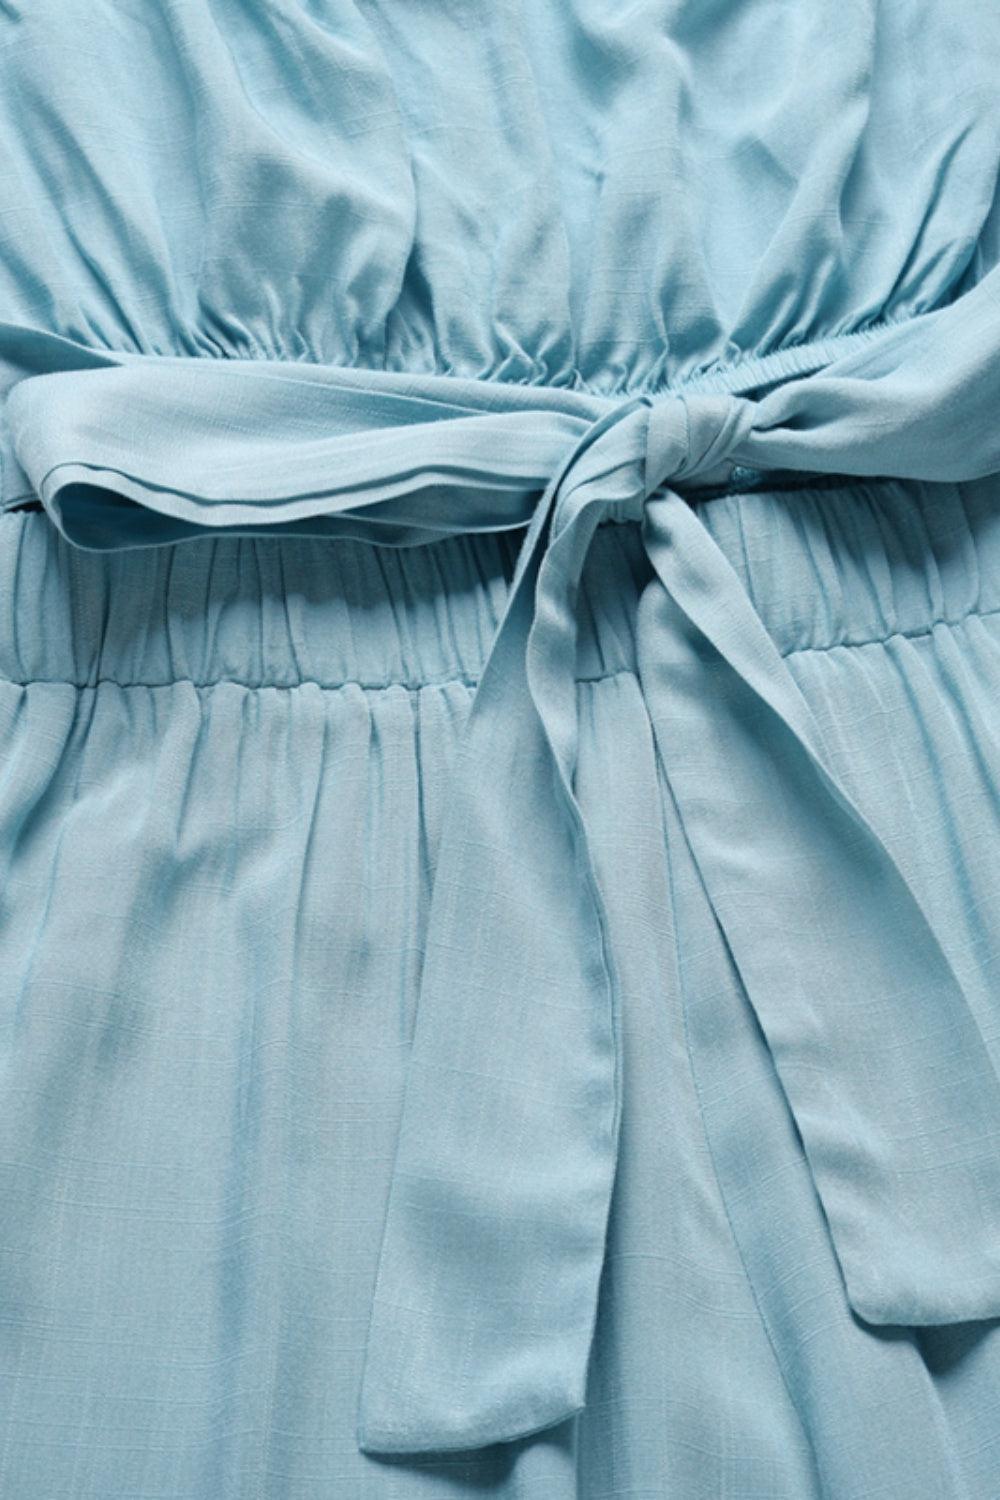 a close up of a blue dress with a tie